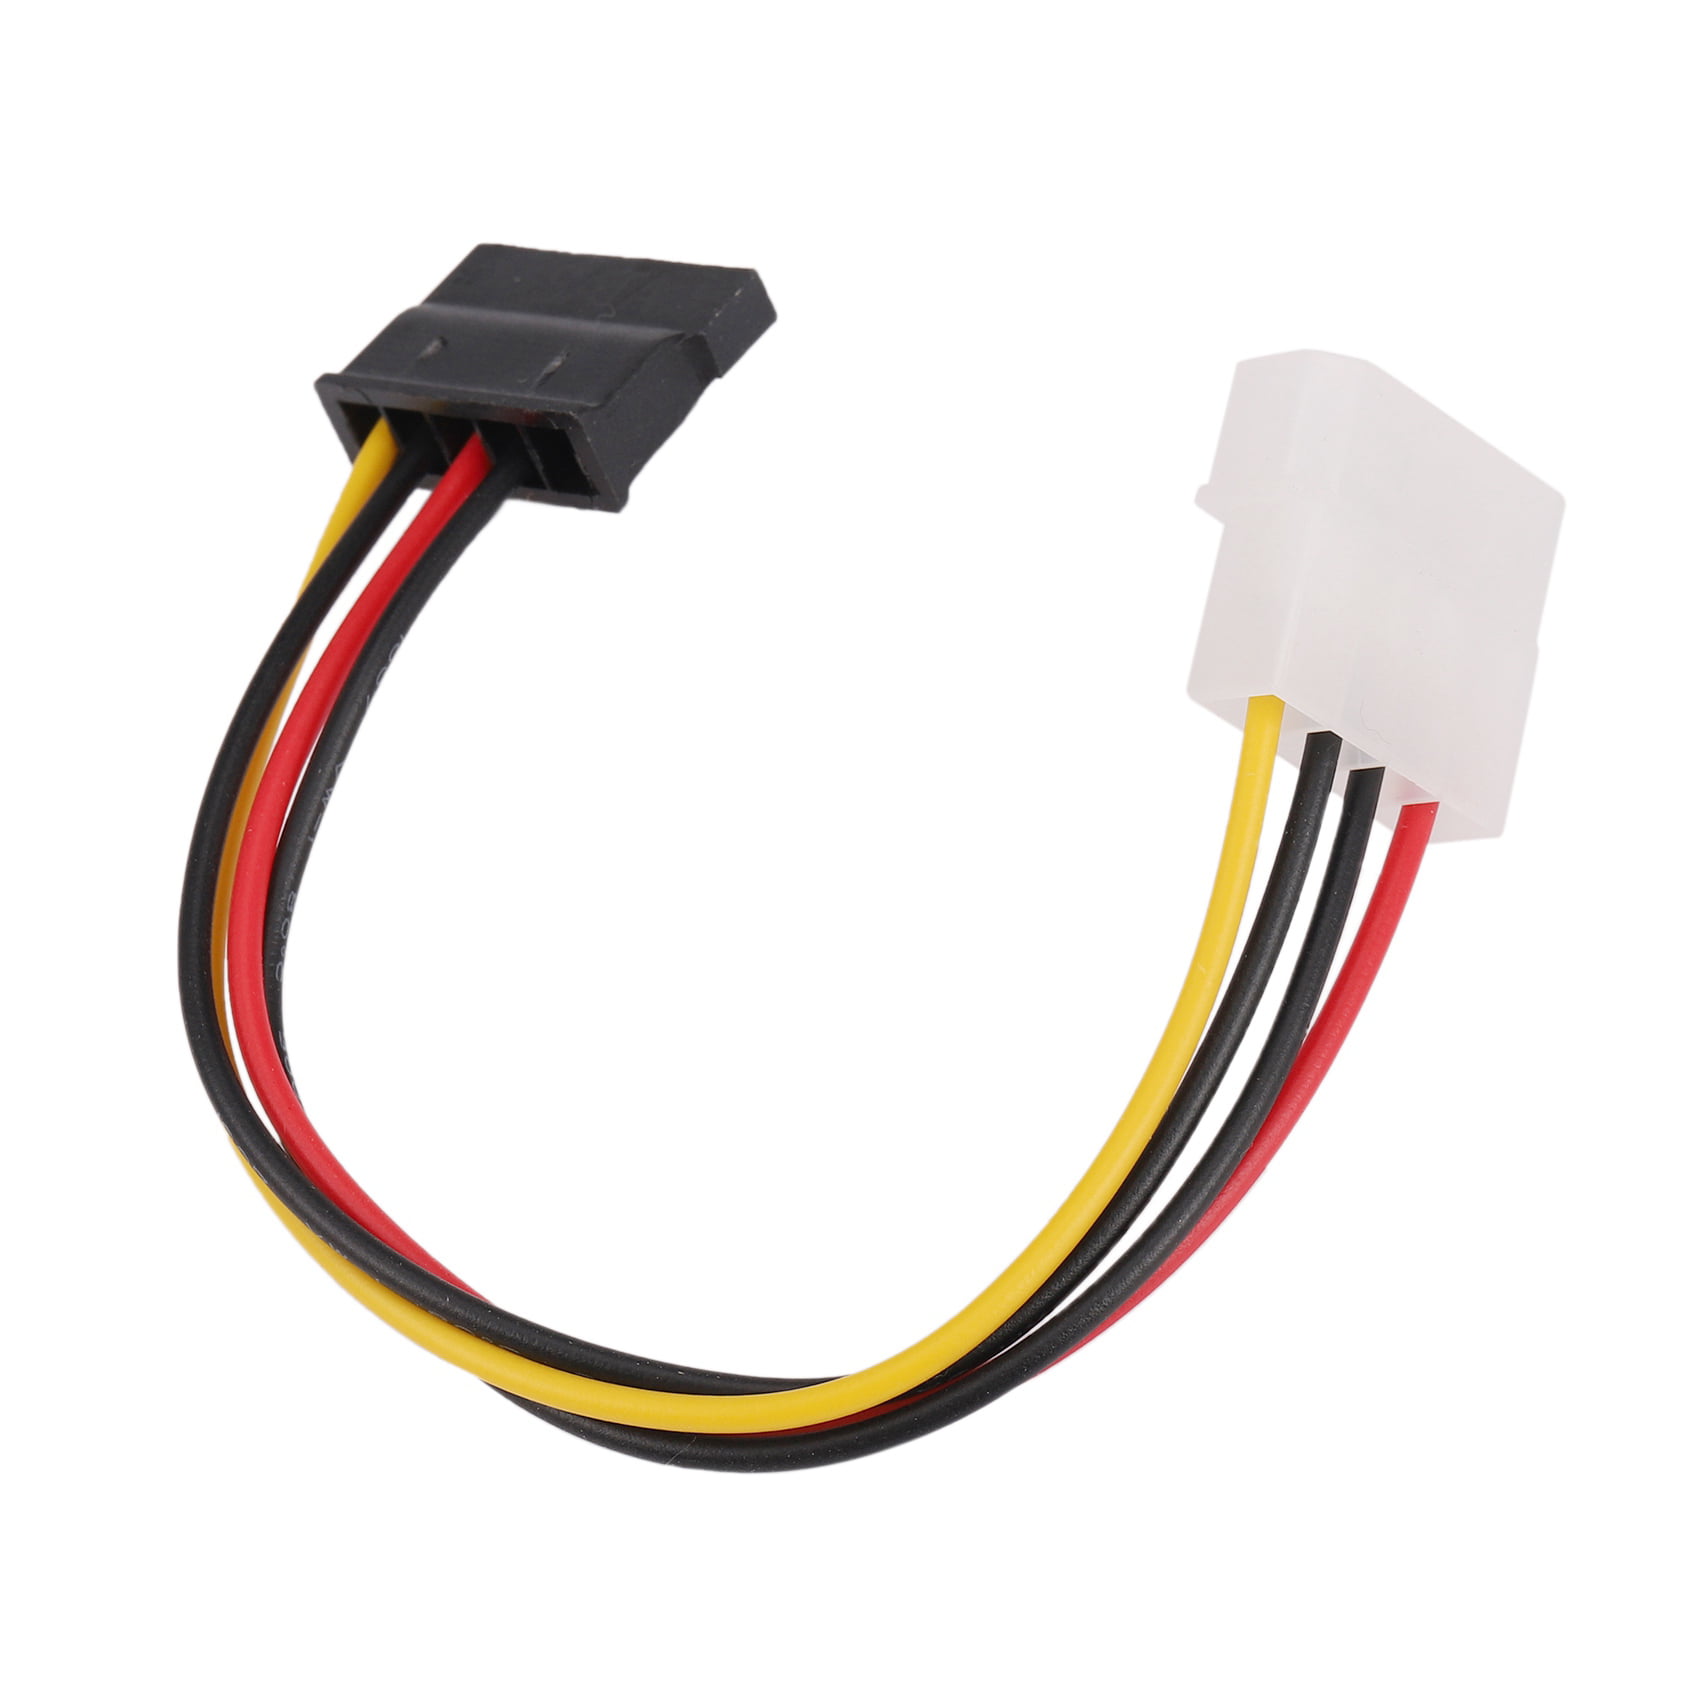 6iN IDE/Molex/IP4/4-pin to SATA Power 15-pin Connector Converter Adapter Cable 